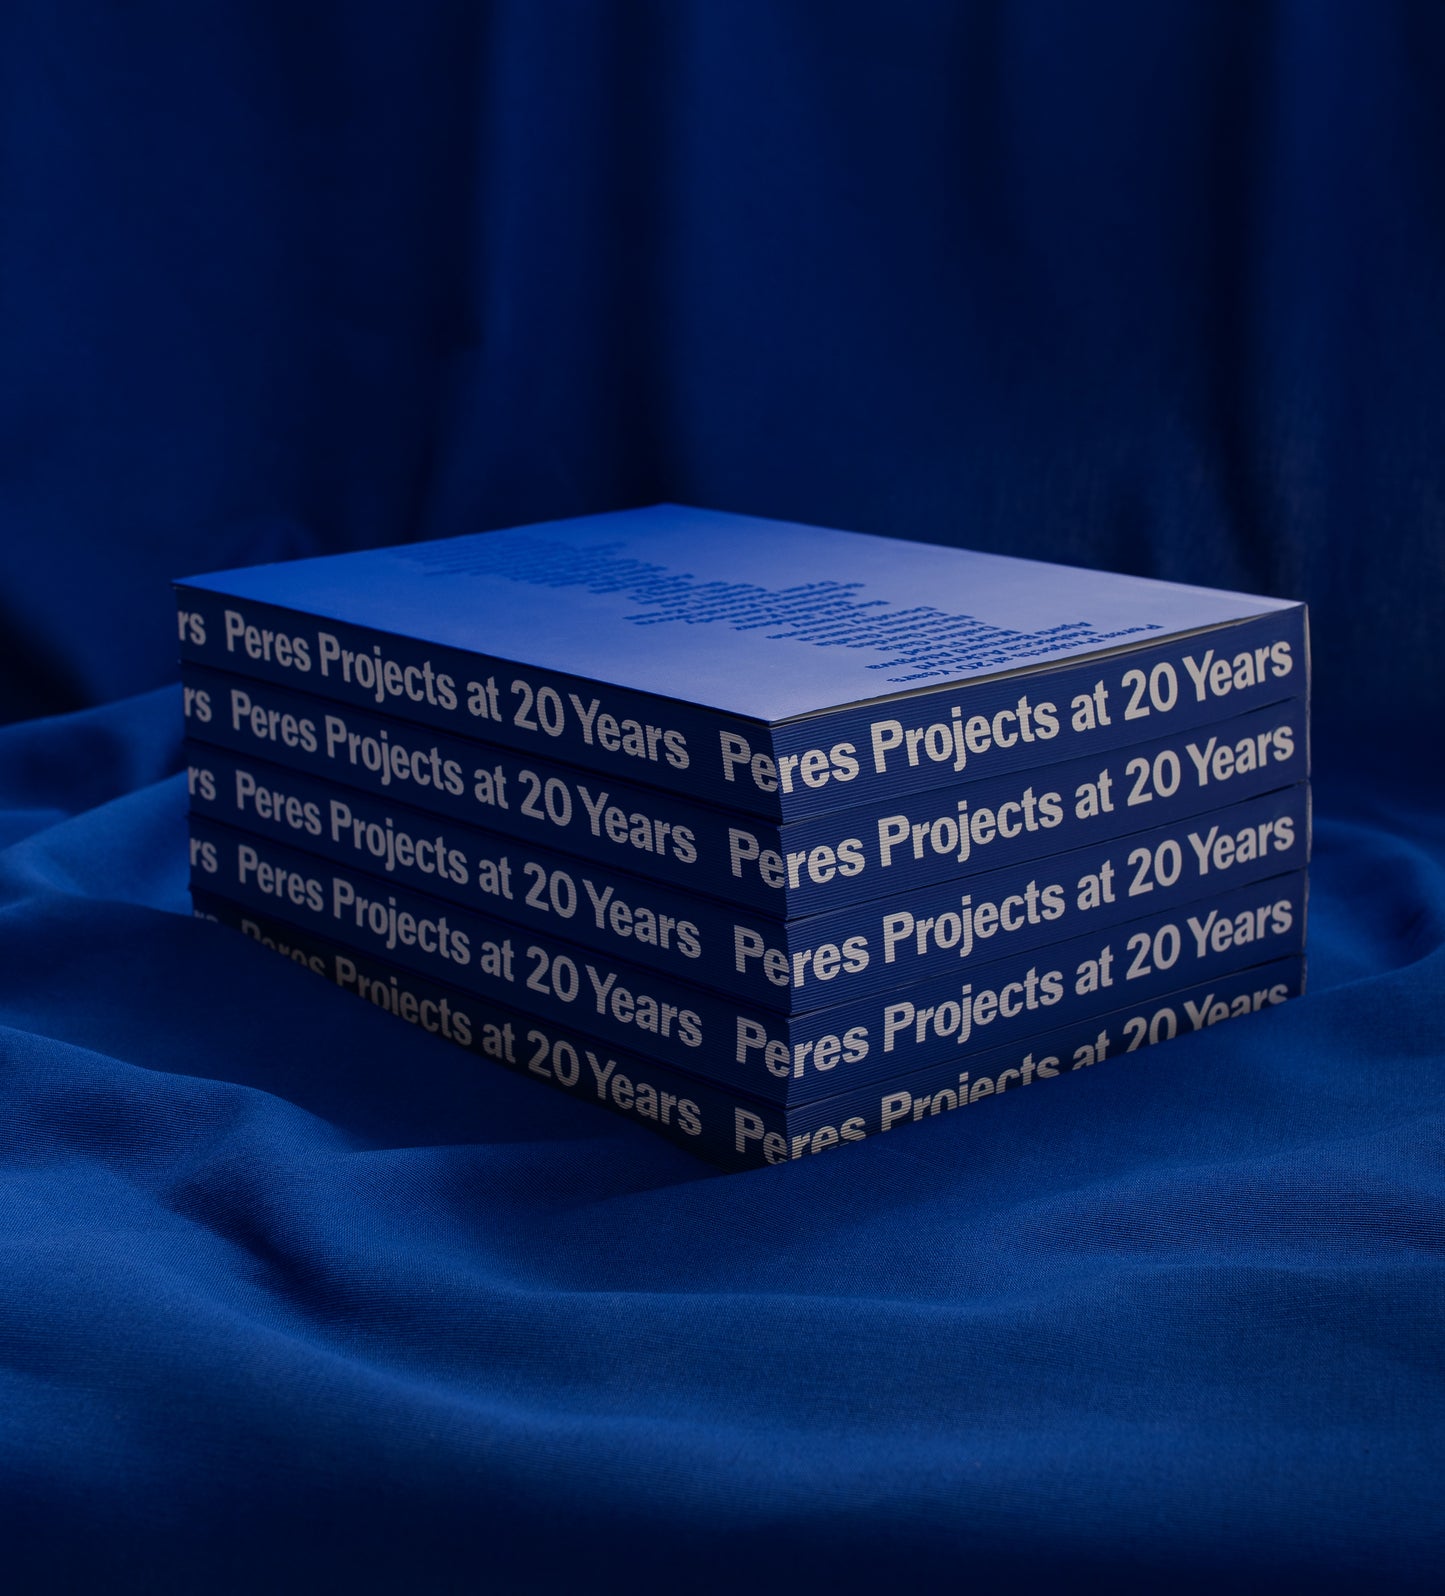 Peres Projects at 20 Years